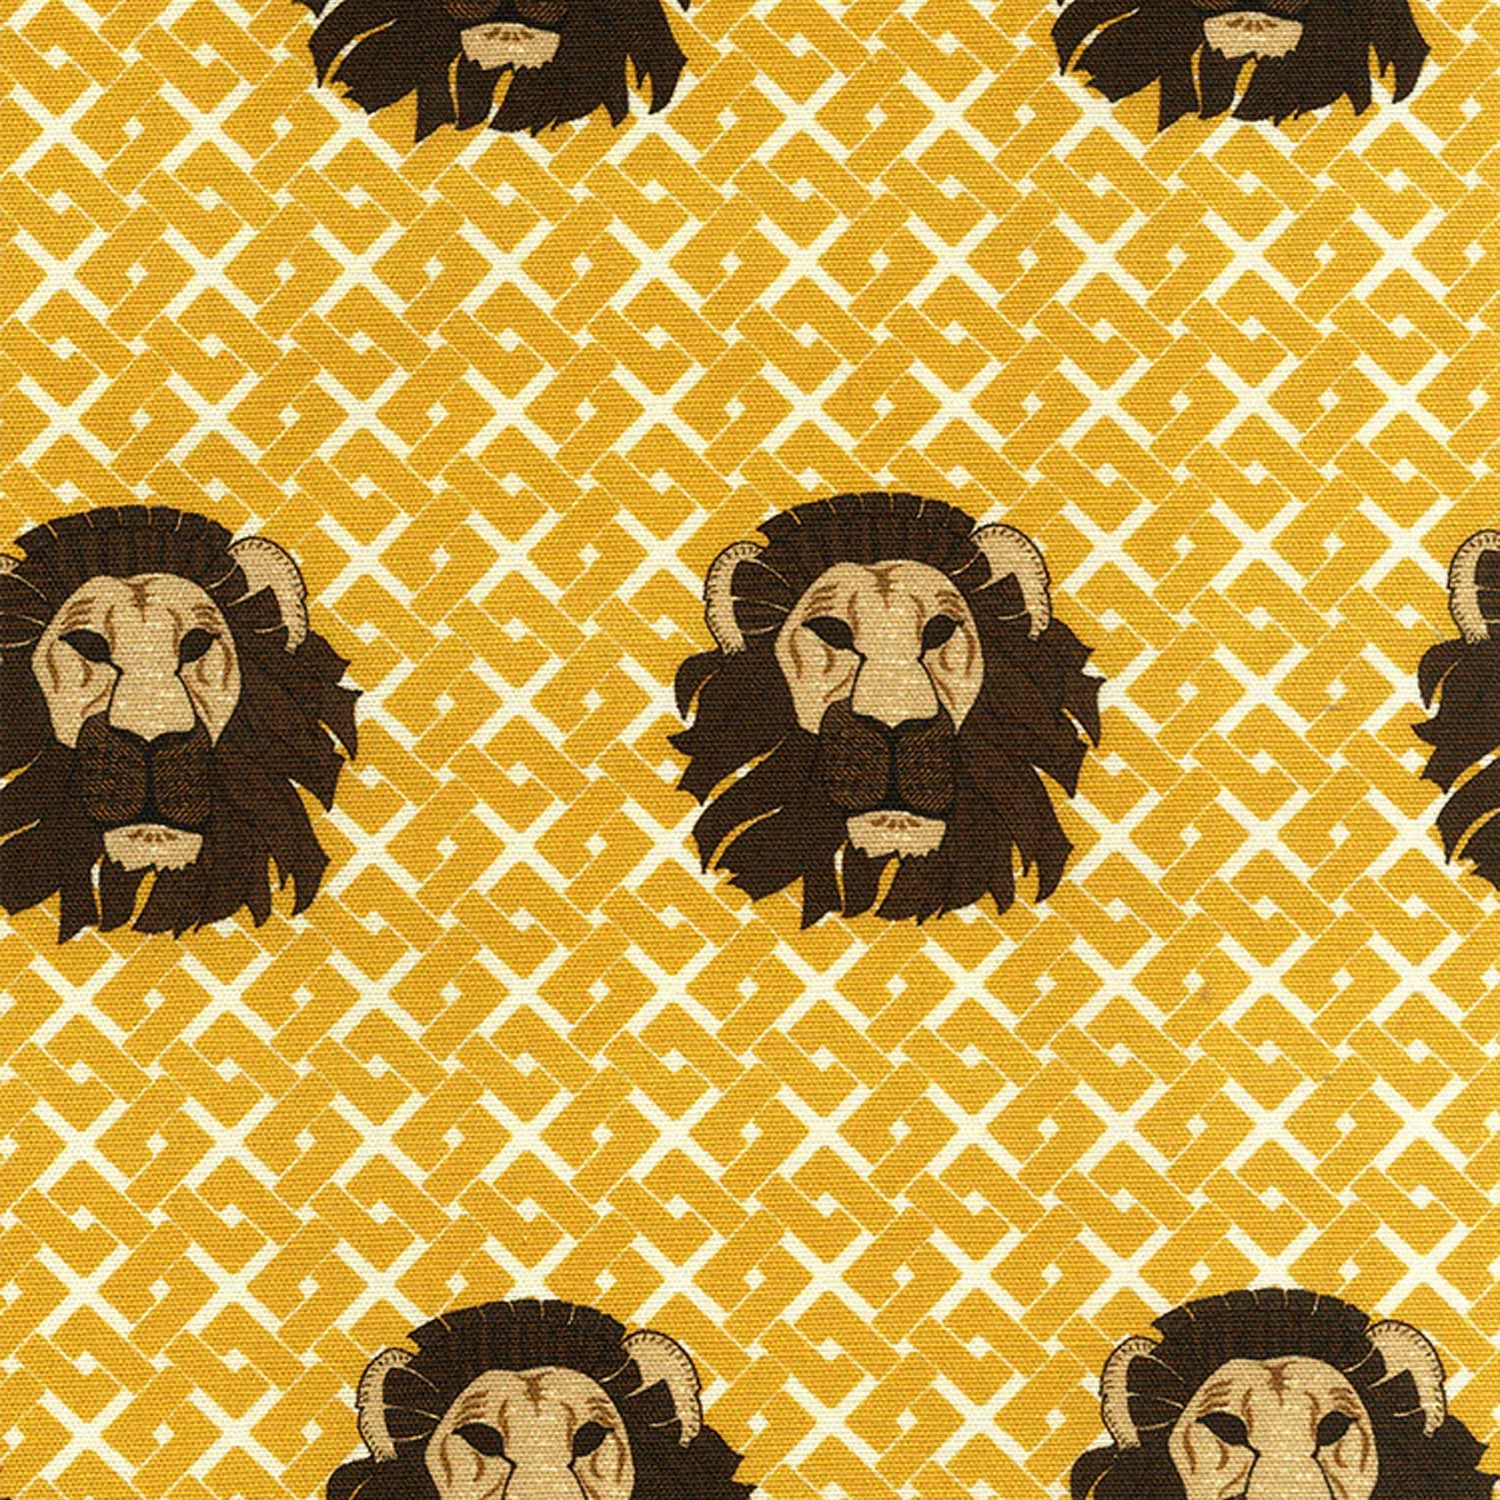 Detail of fabric in a repeating lion face print on a geometric field in shades of brown and yellow.